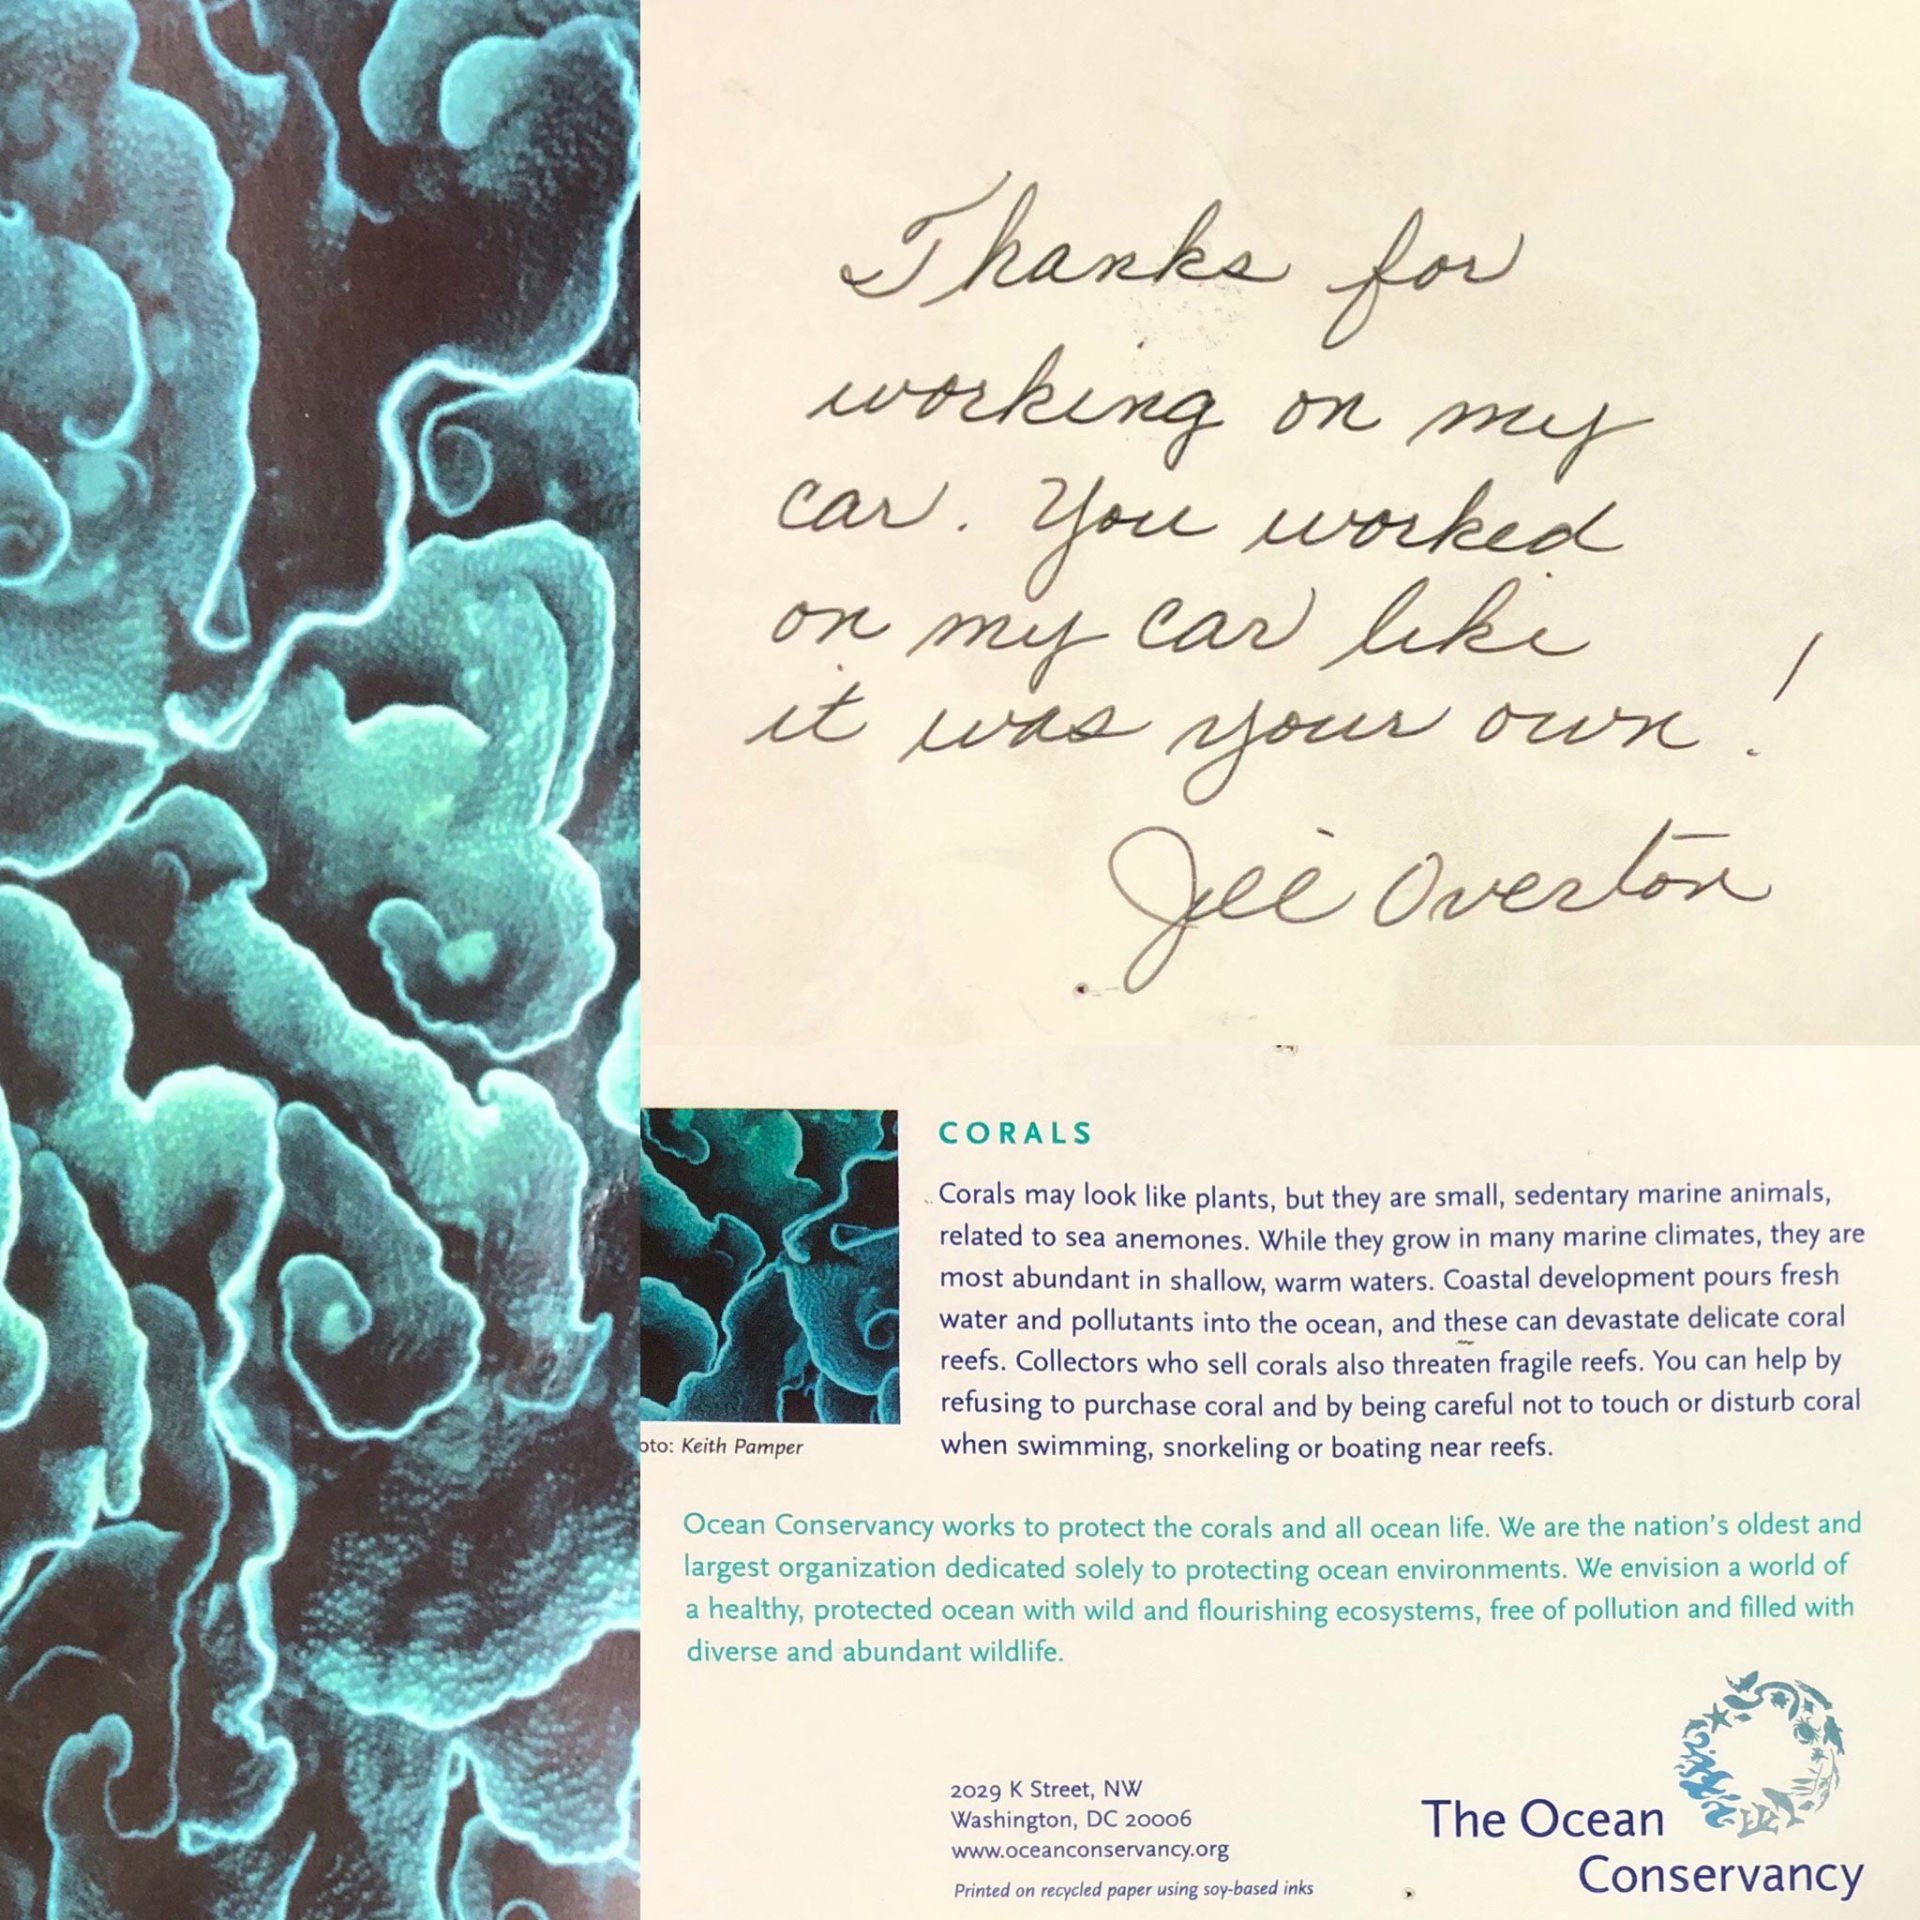 Letter from The Ocean Conservancy — Oxford, OH — Stateline Auto Body